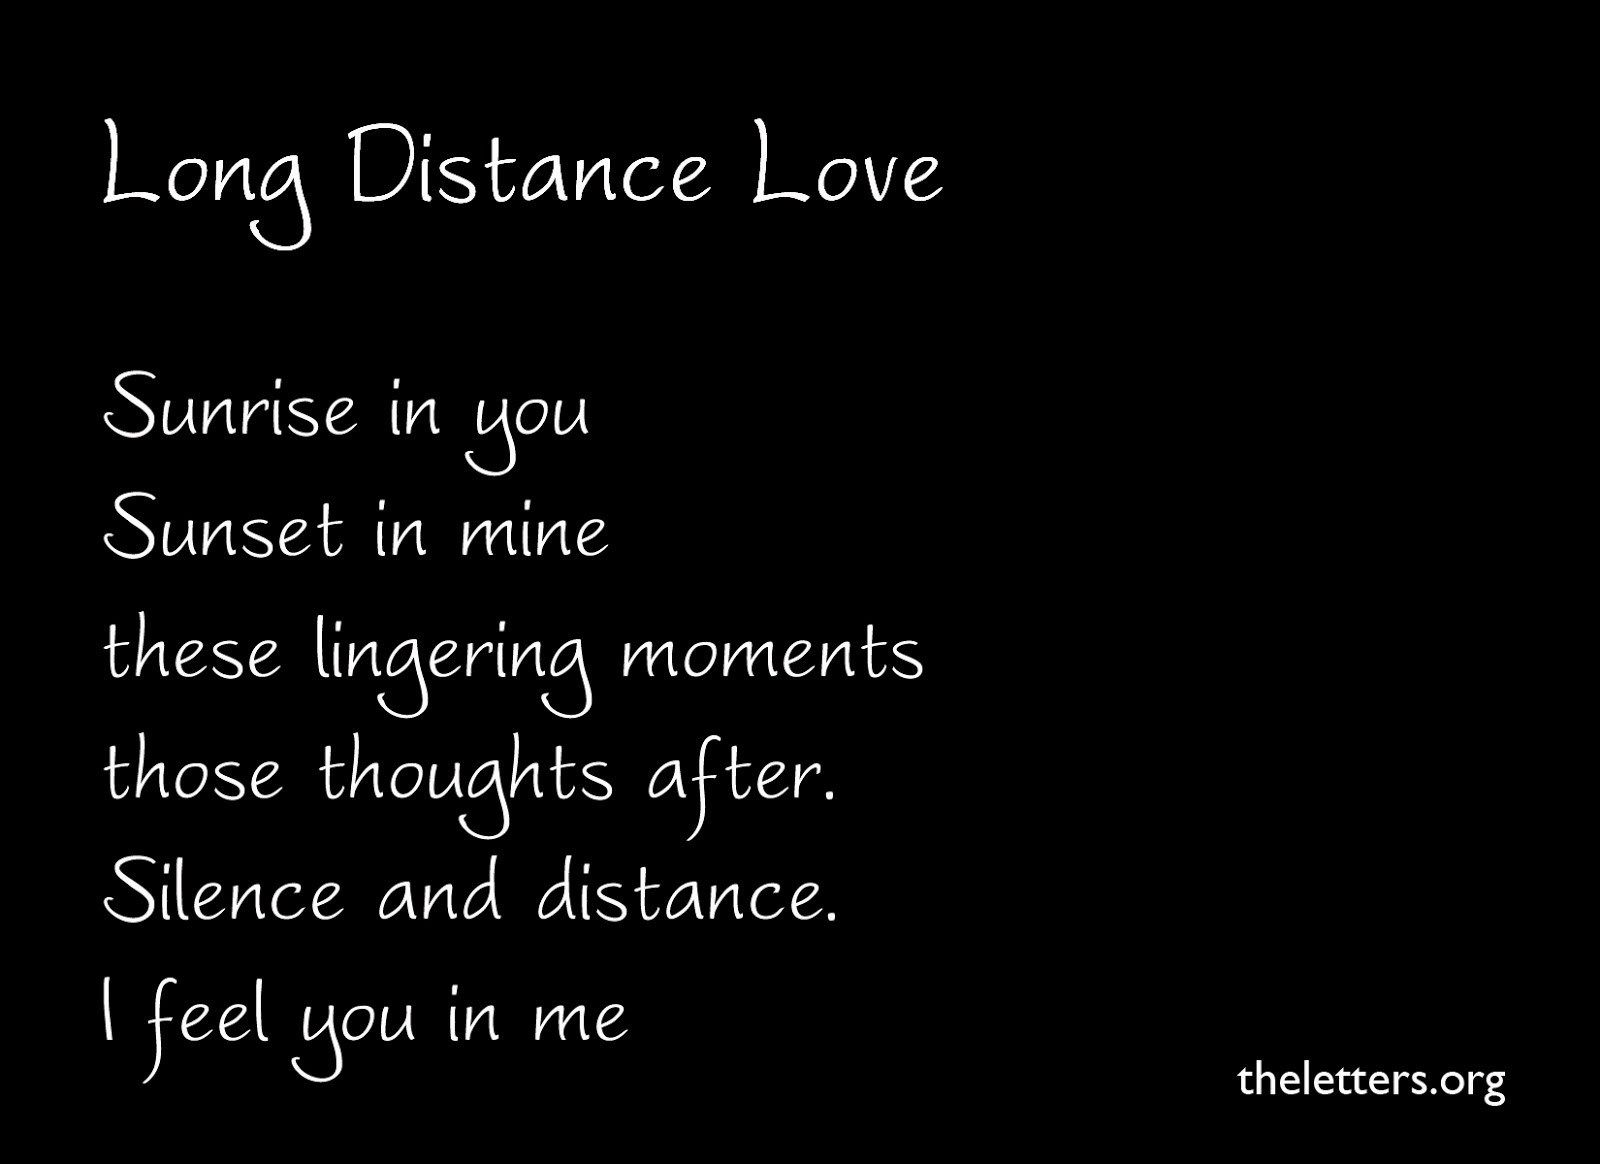 Love Quote For Him Long Distance
 Cute Long Distance Love Quotes For Him QuotesGram